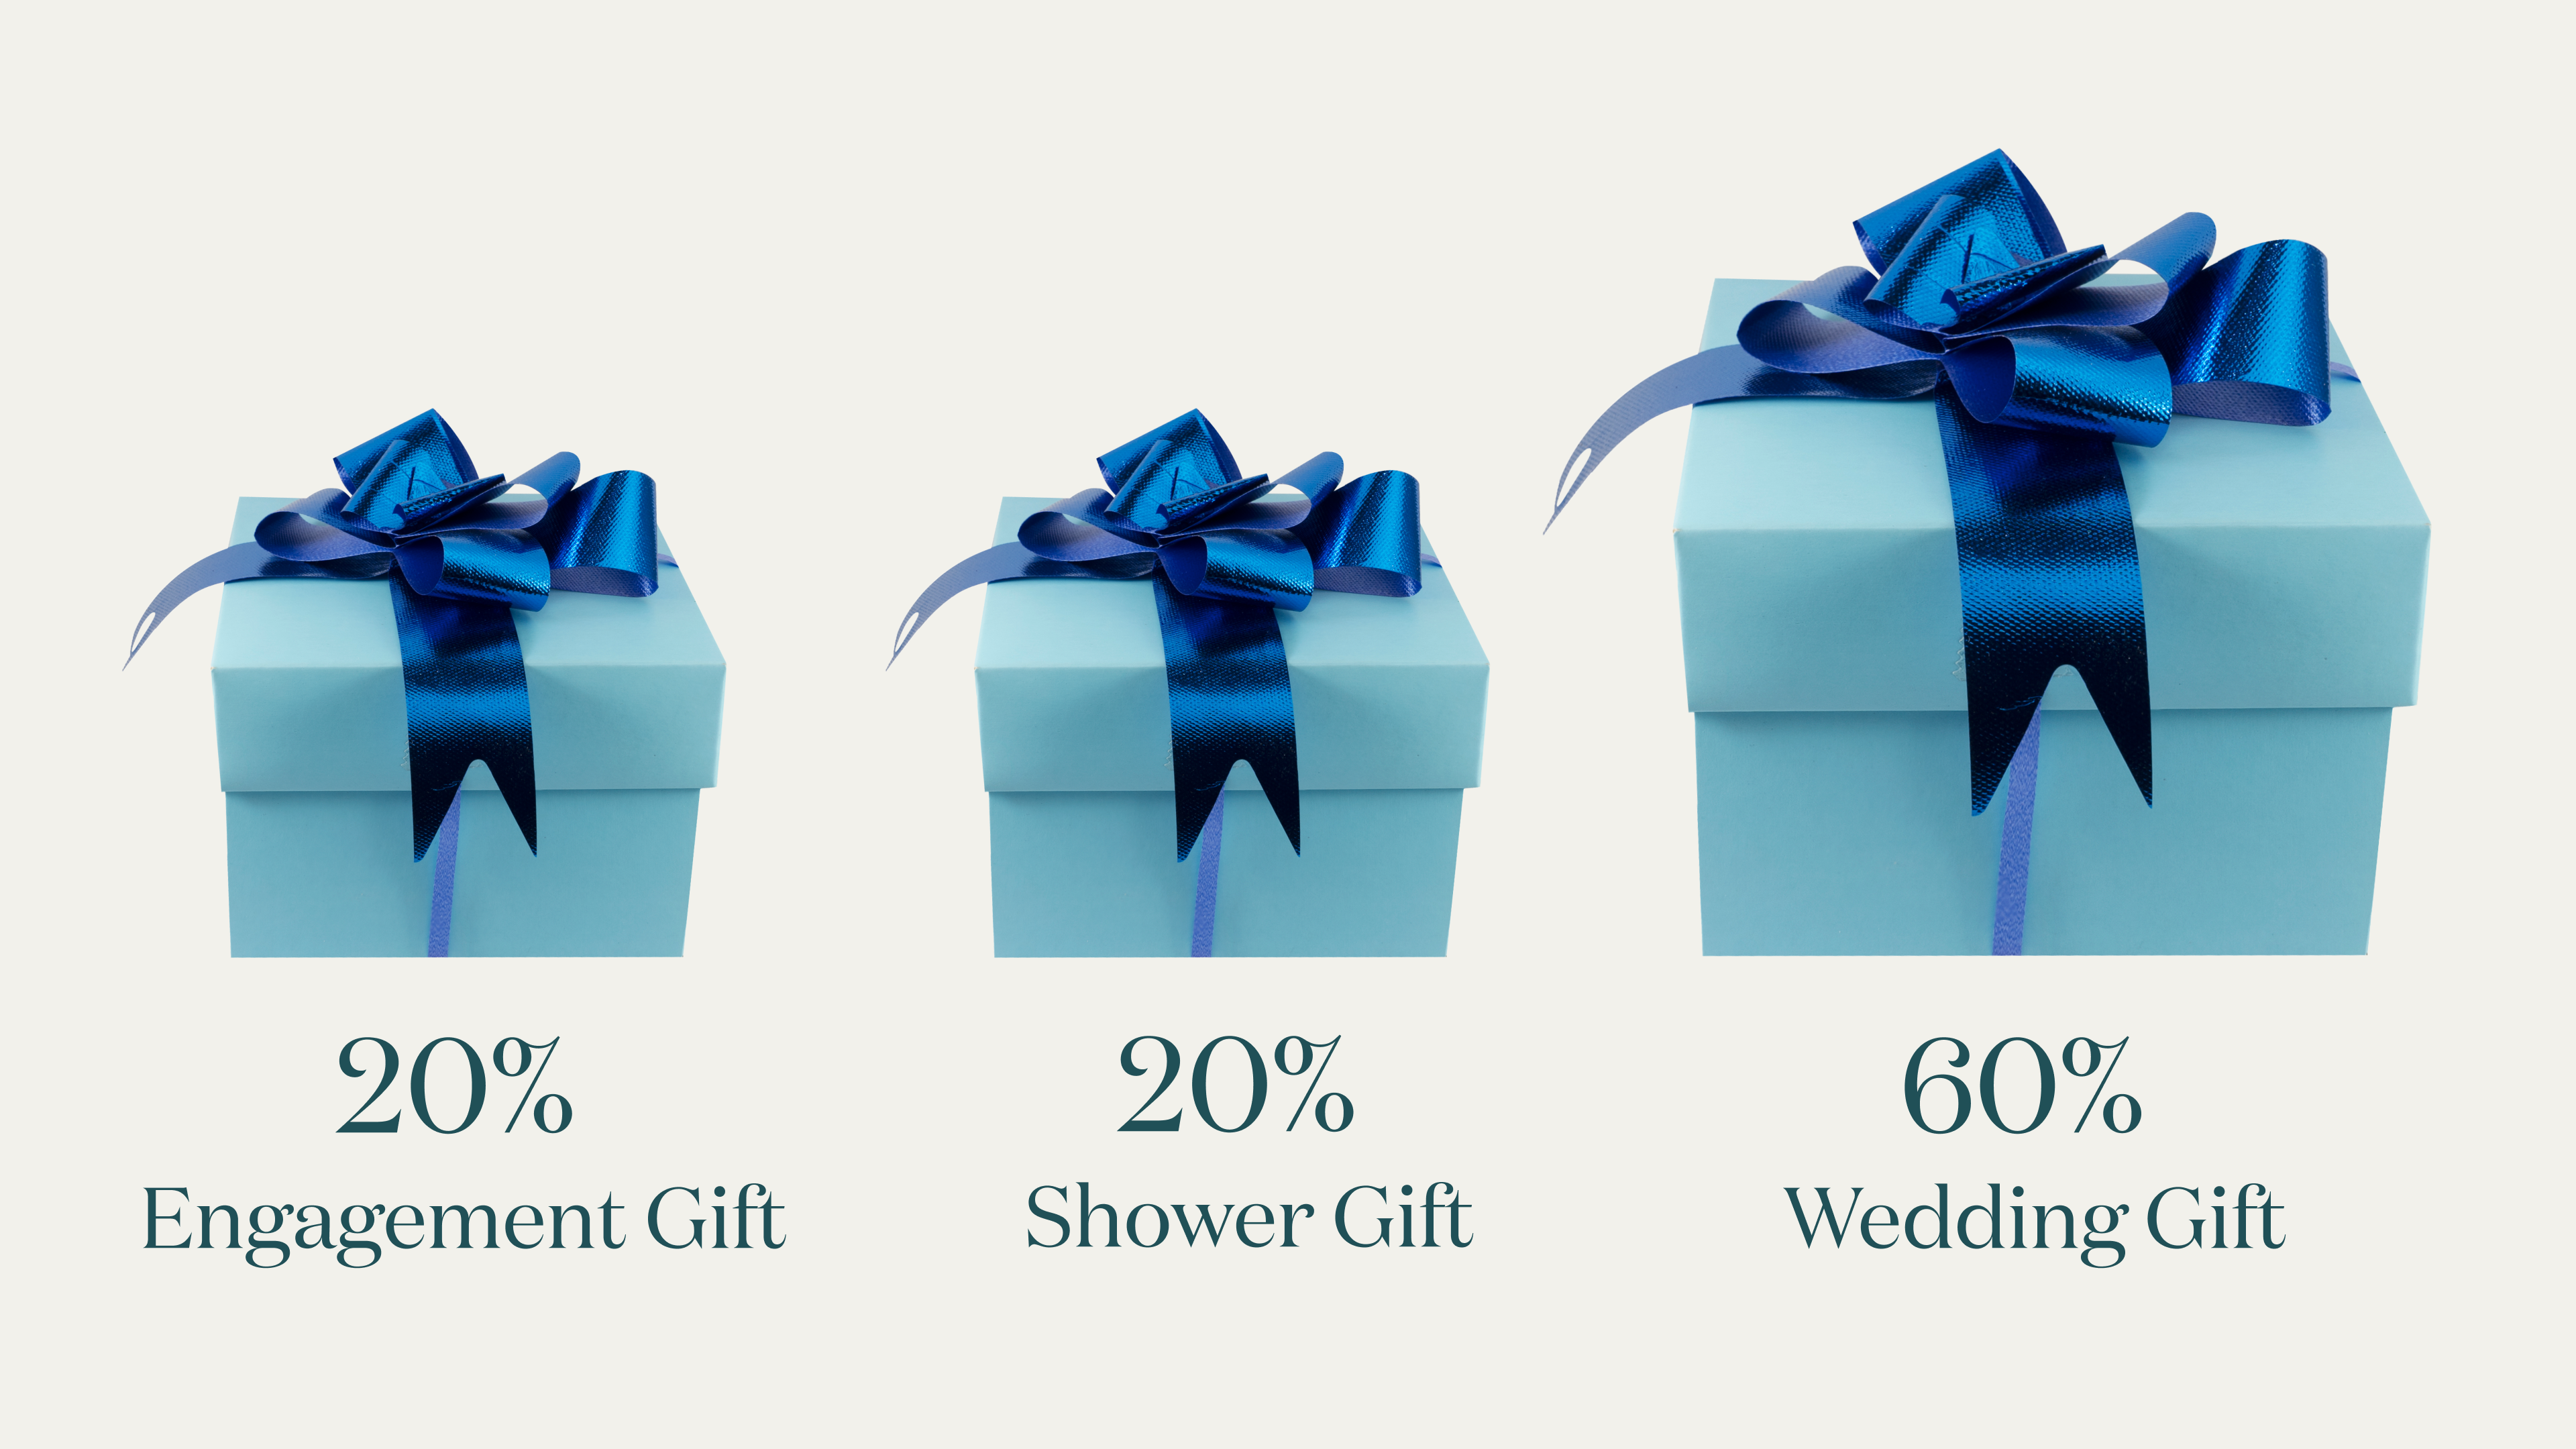 Different box sizes with gift amounts